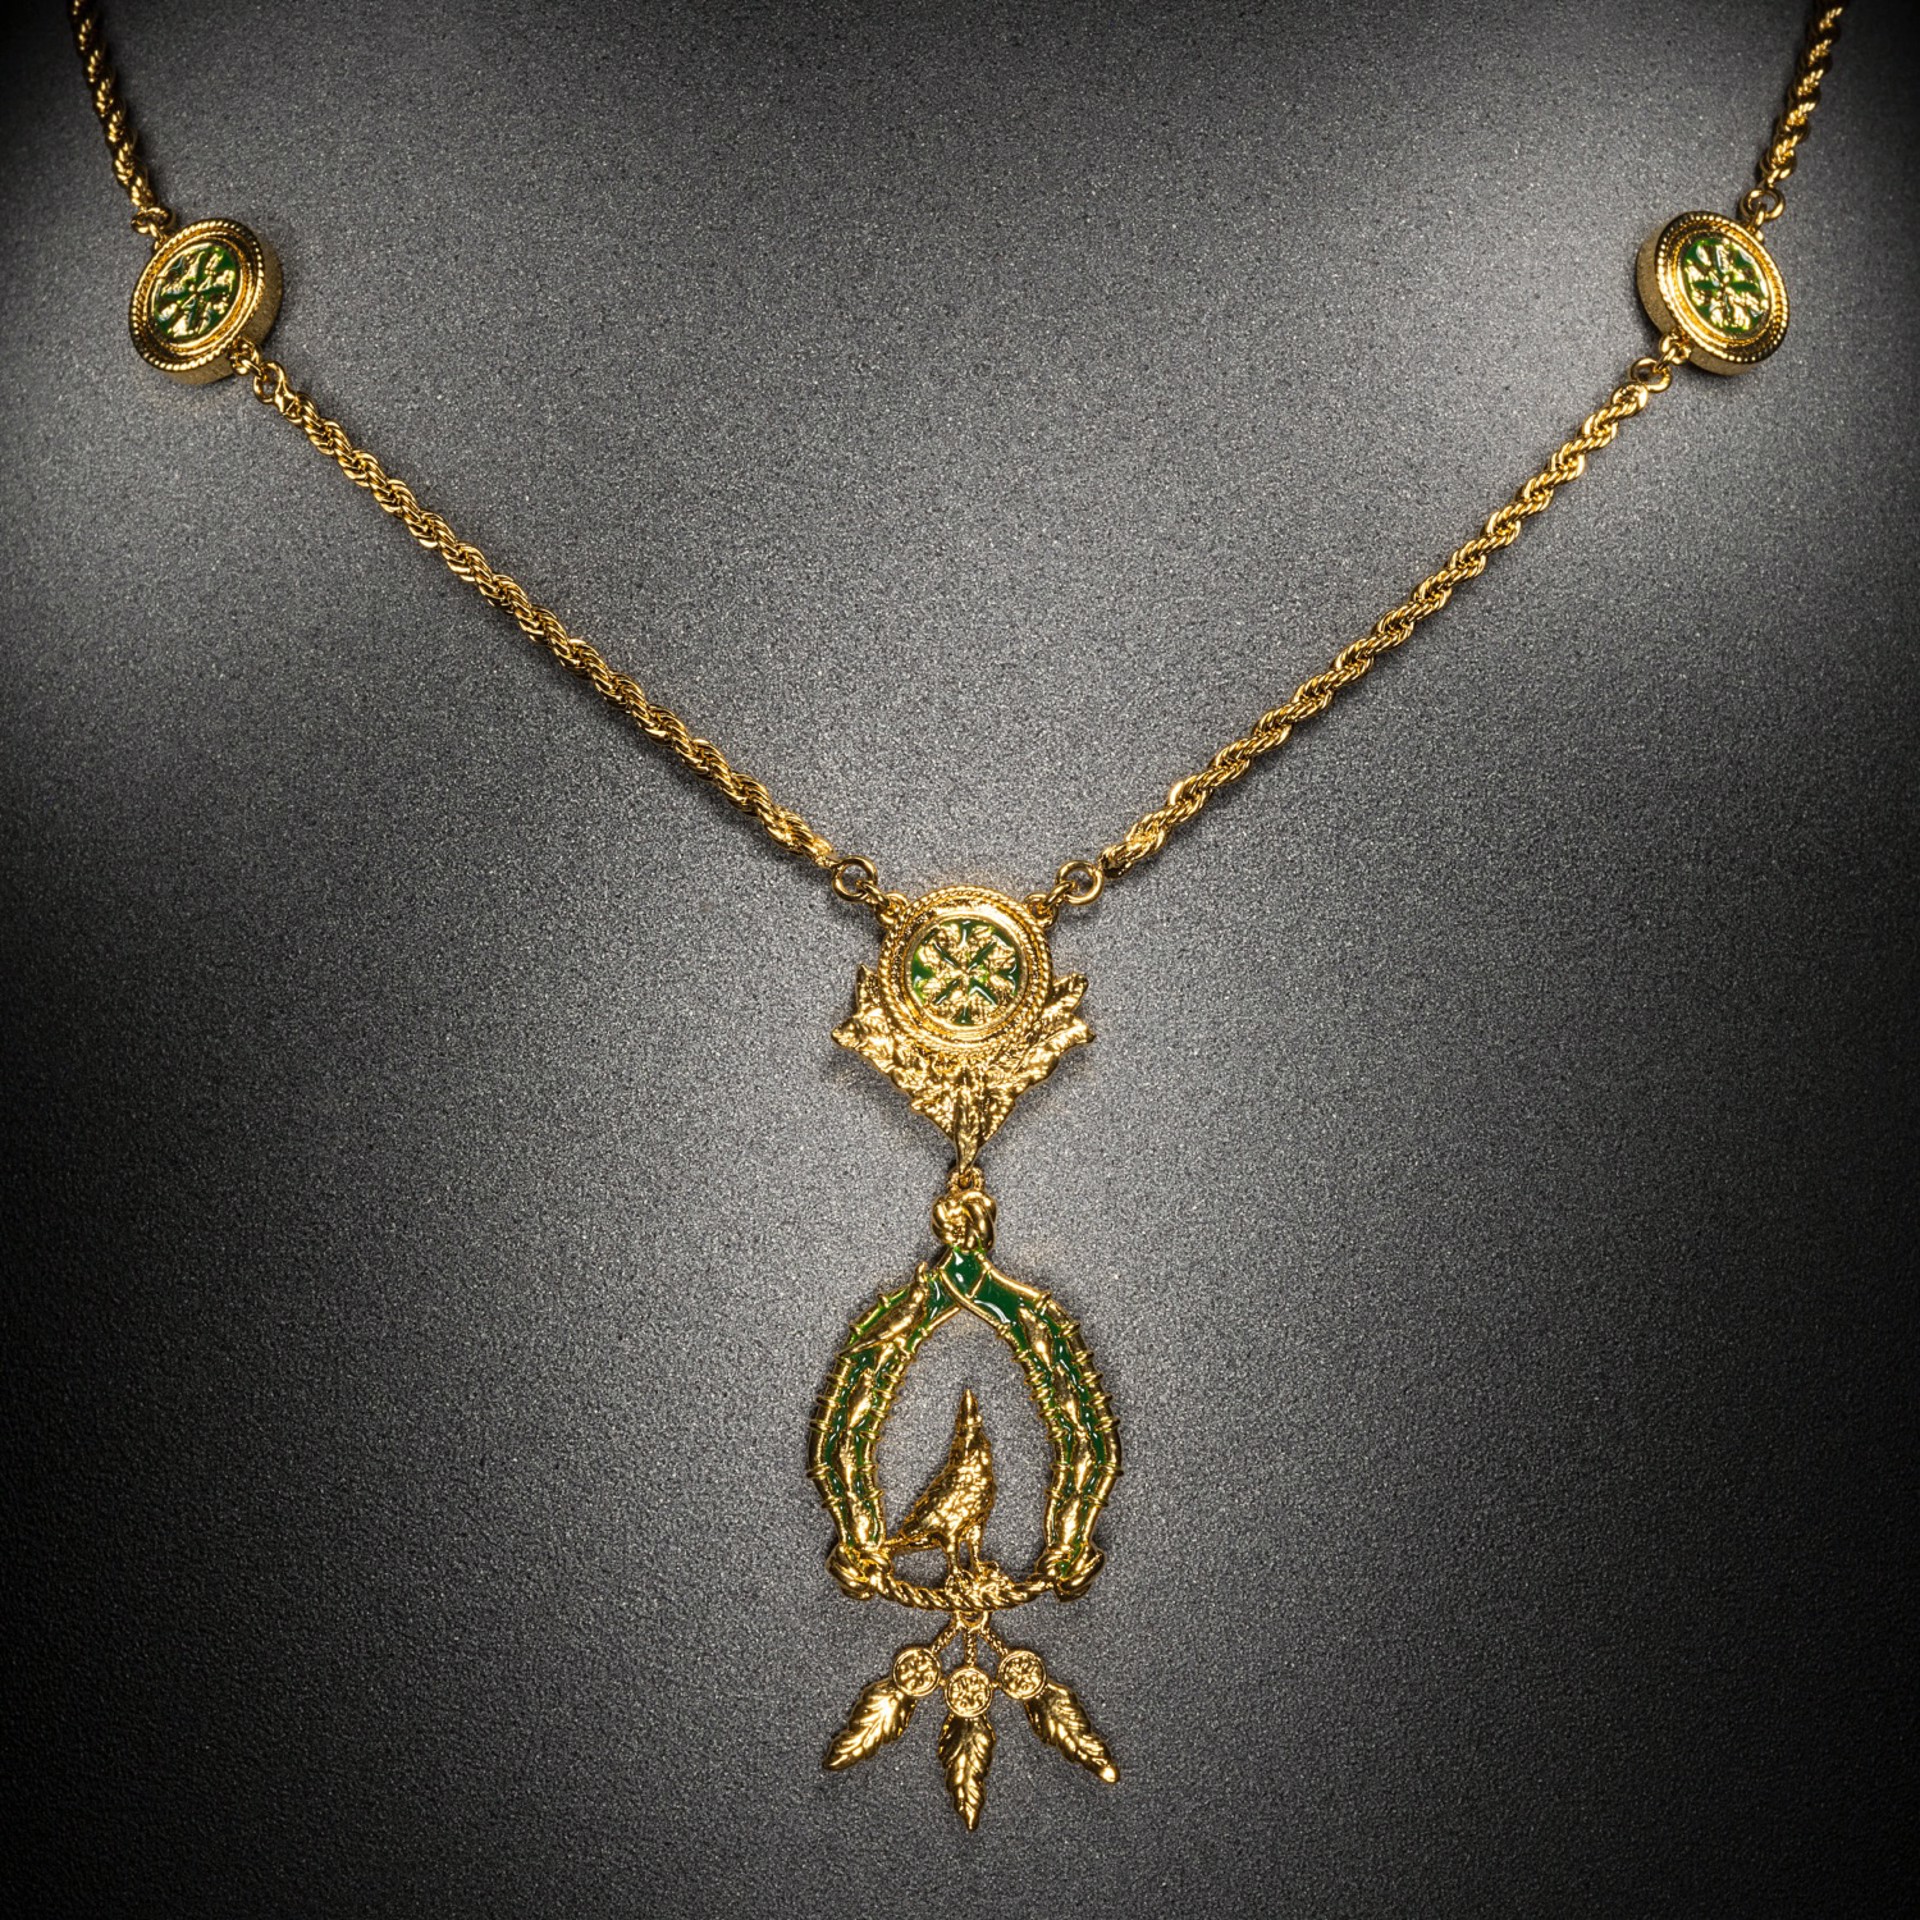 Vigor Necklace with Feathers - Gold and Green by Angela Mia